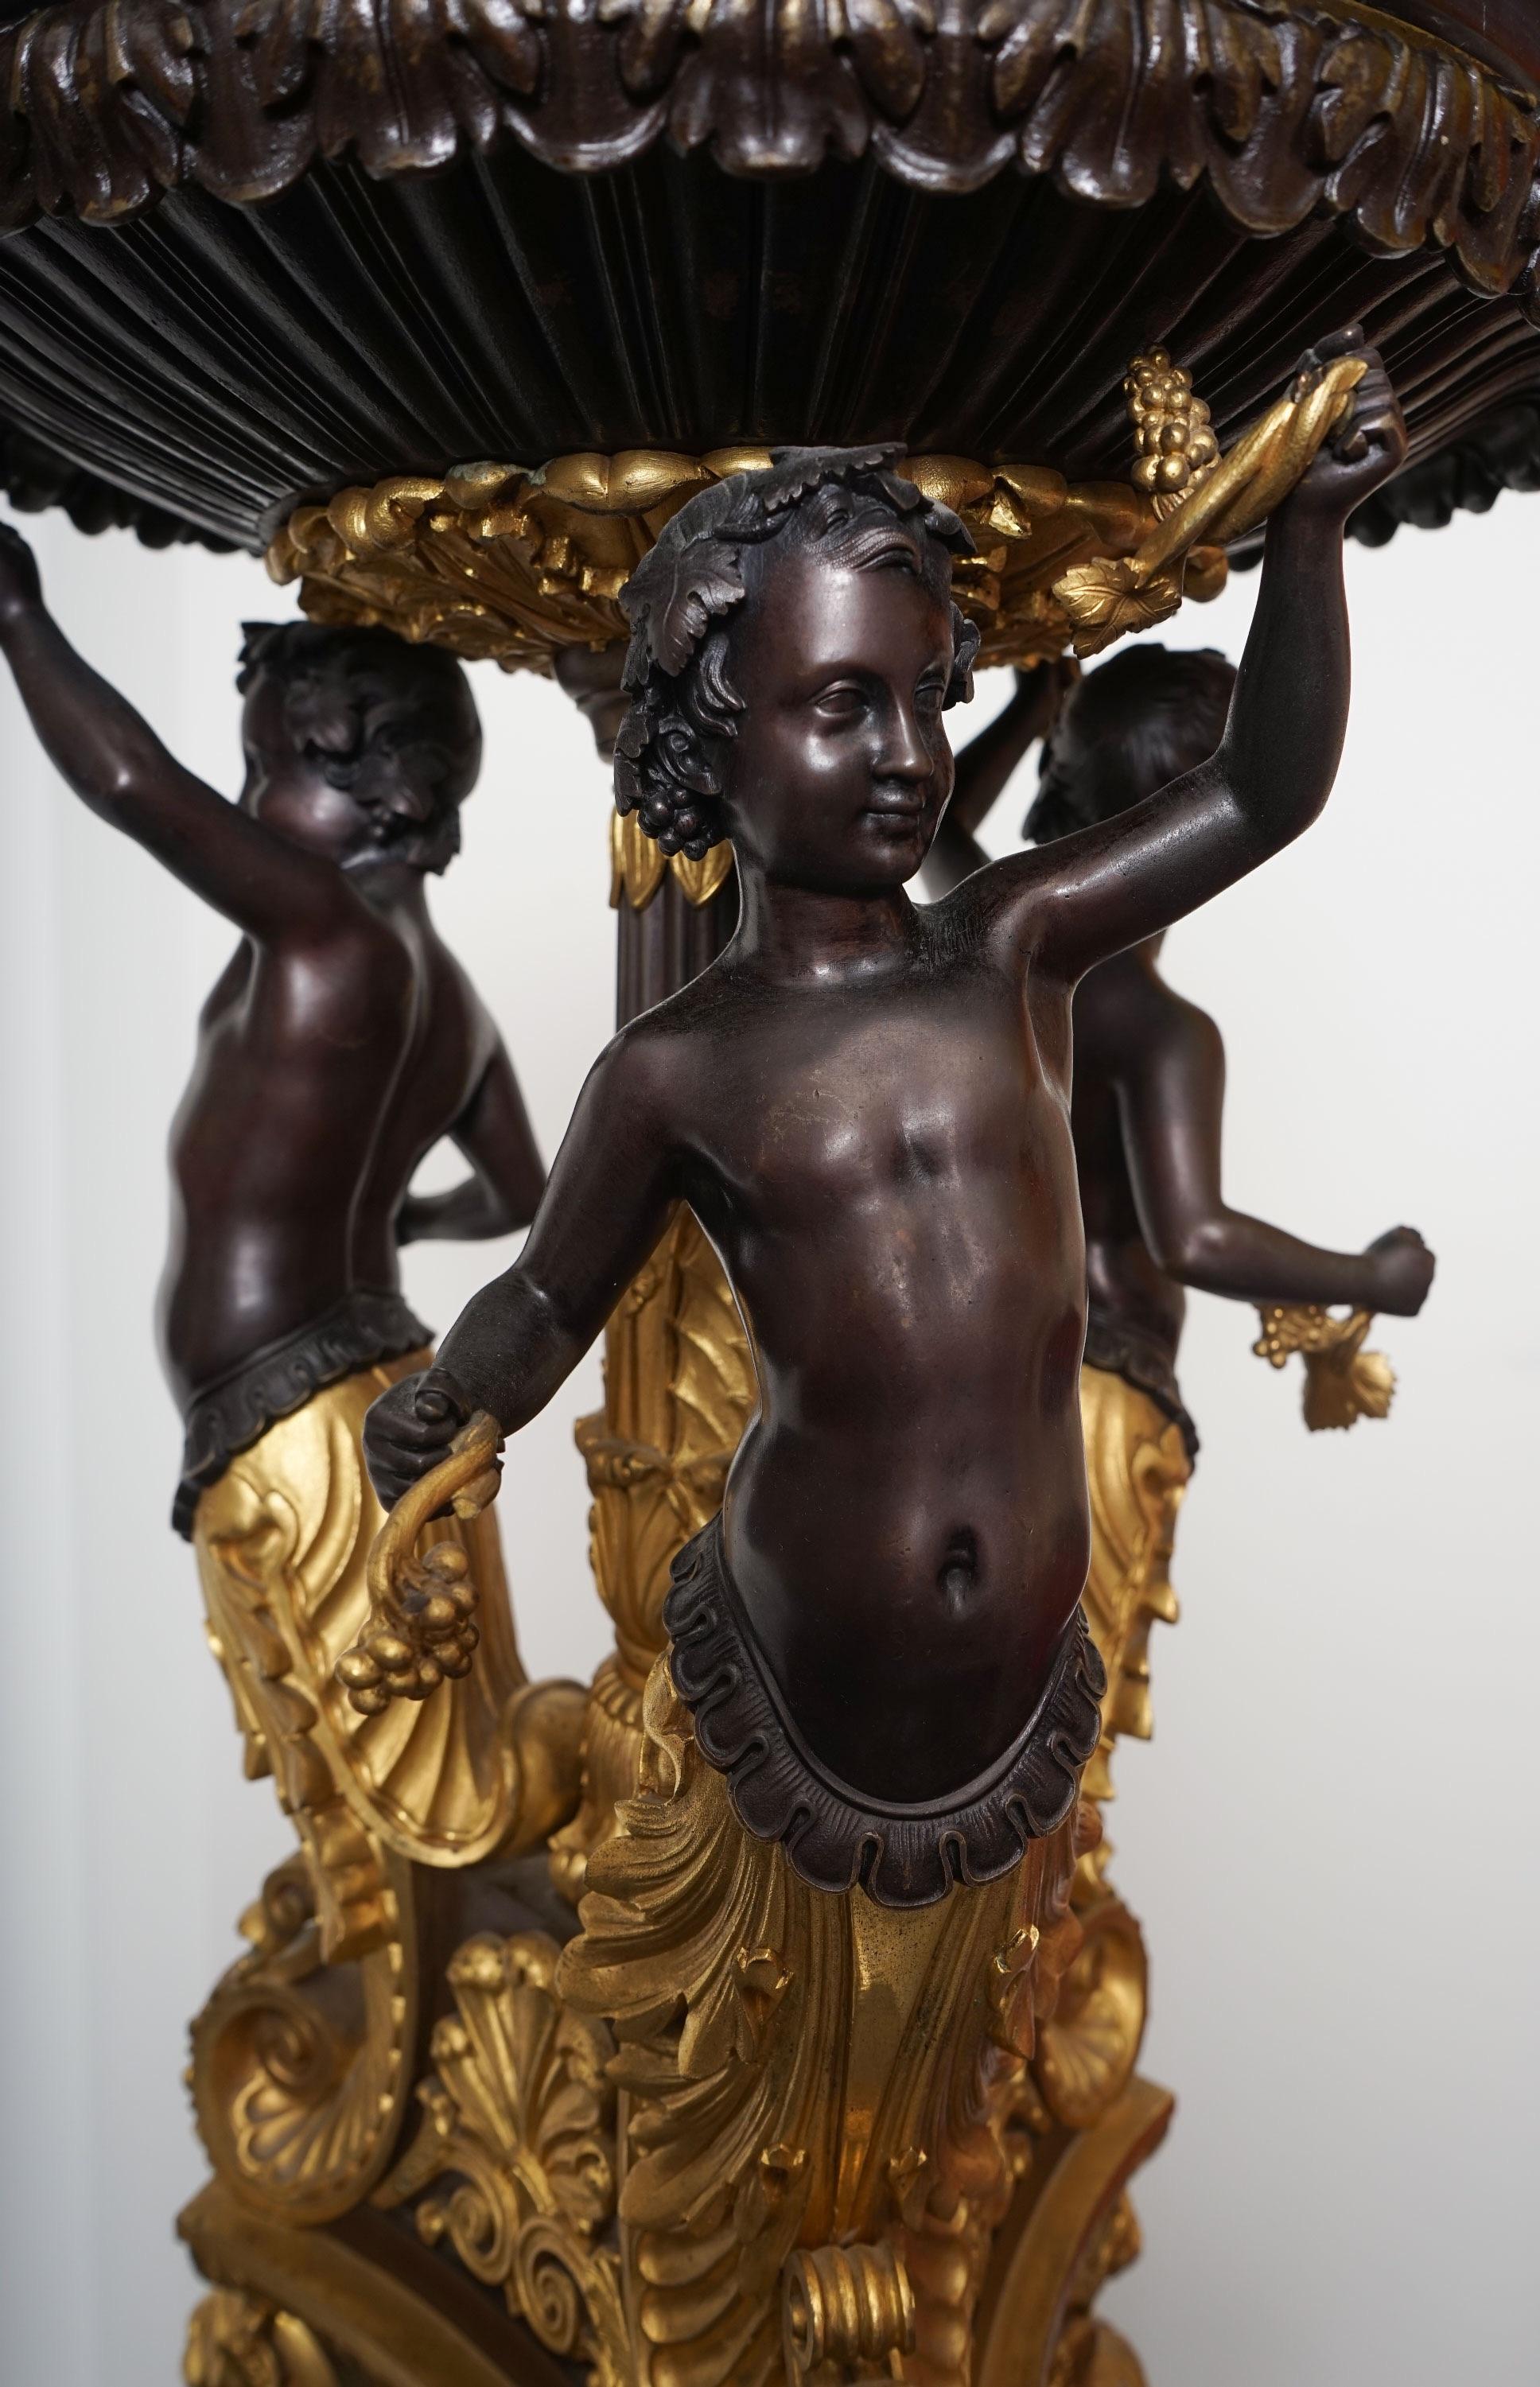 Empire style center piece - Homage to Bacchus
Italy
Bronze and marble
Measures: 62 x 37 cm; 24.4 x 14.5 in.